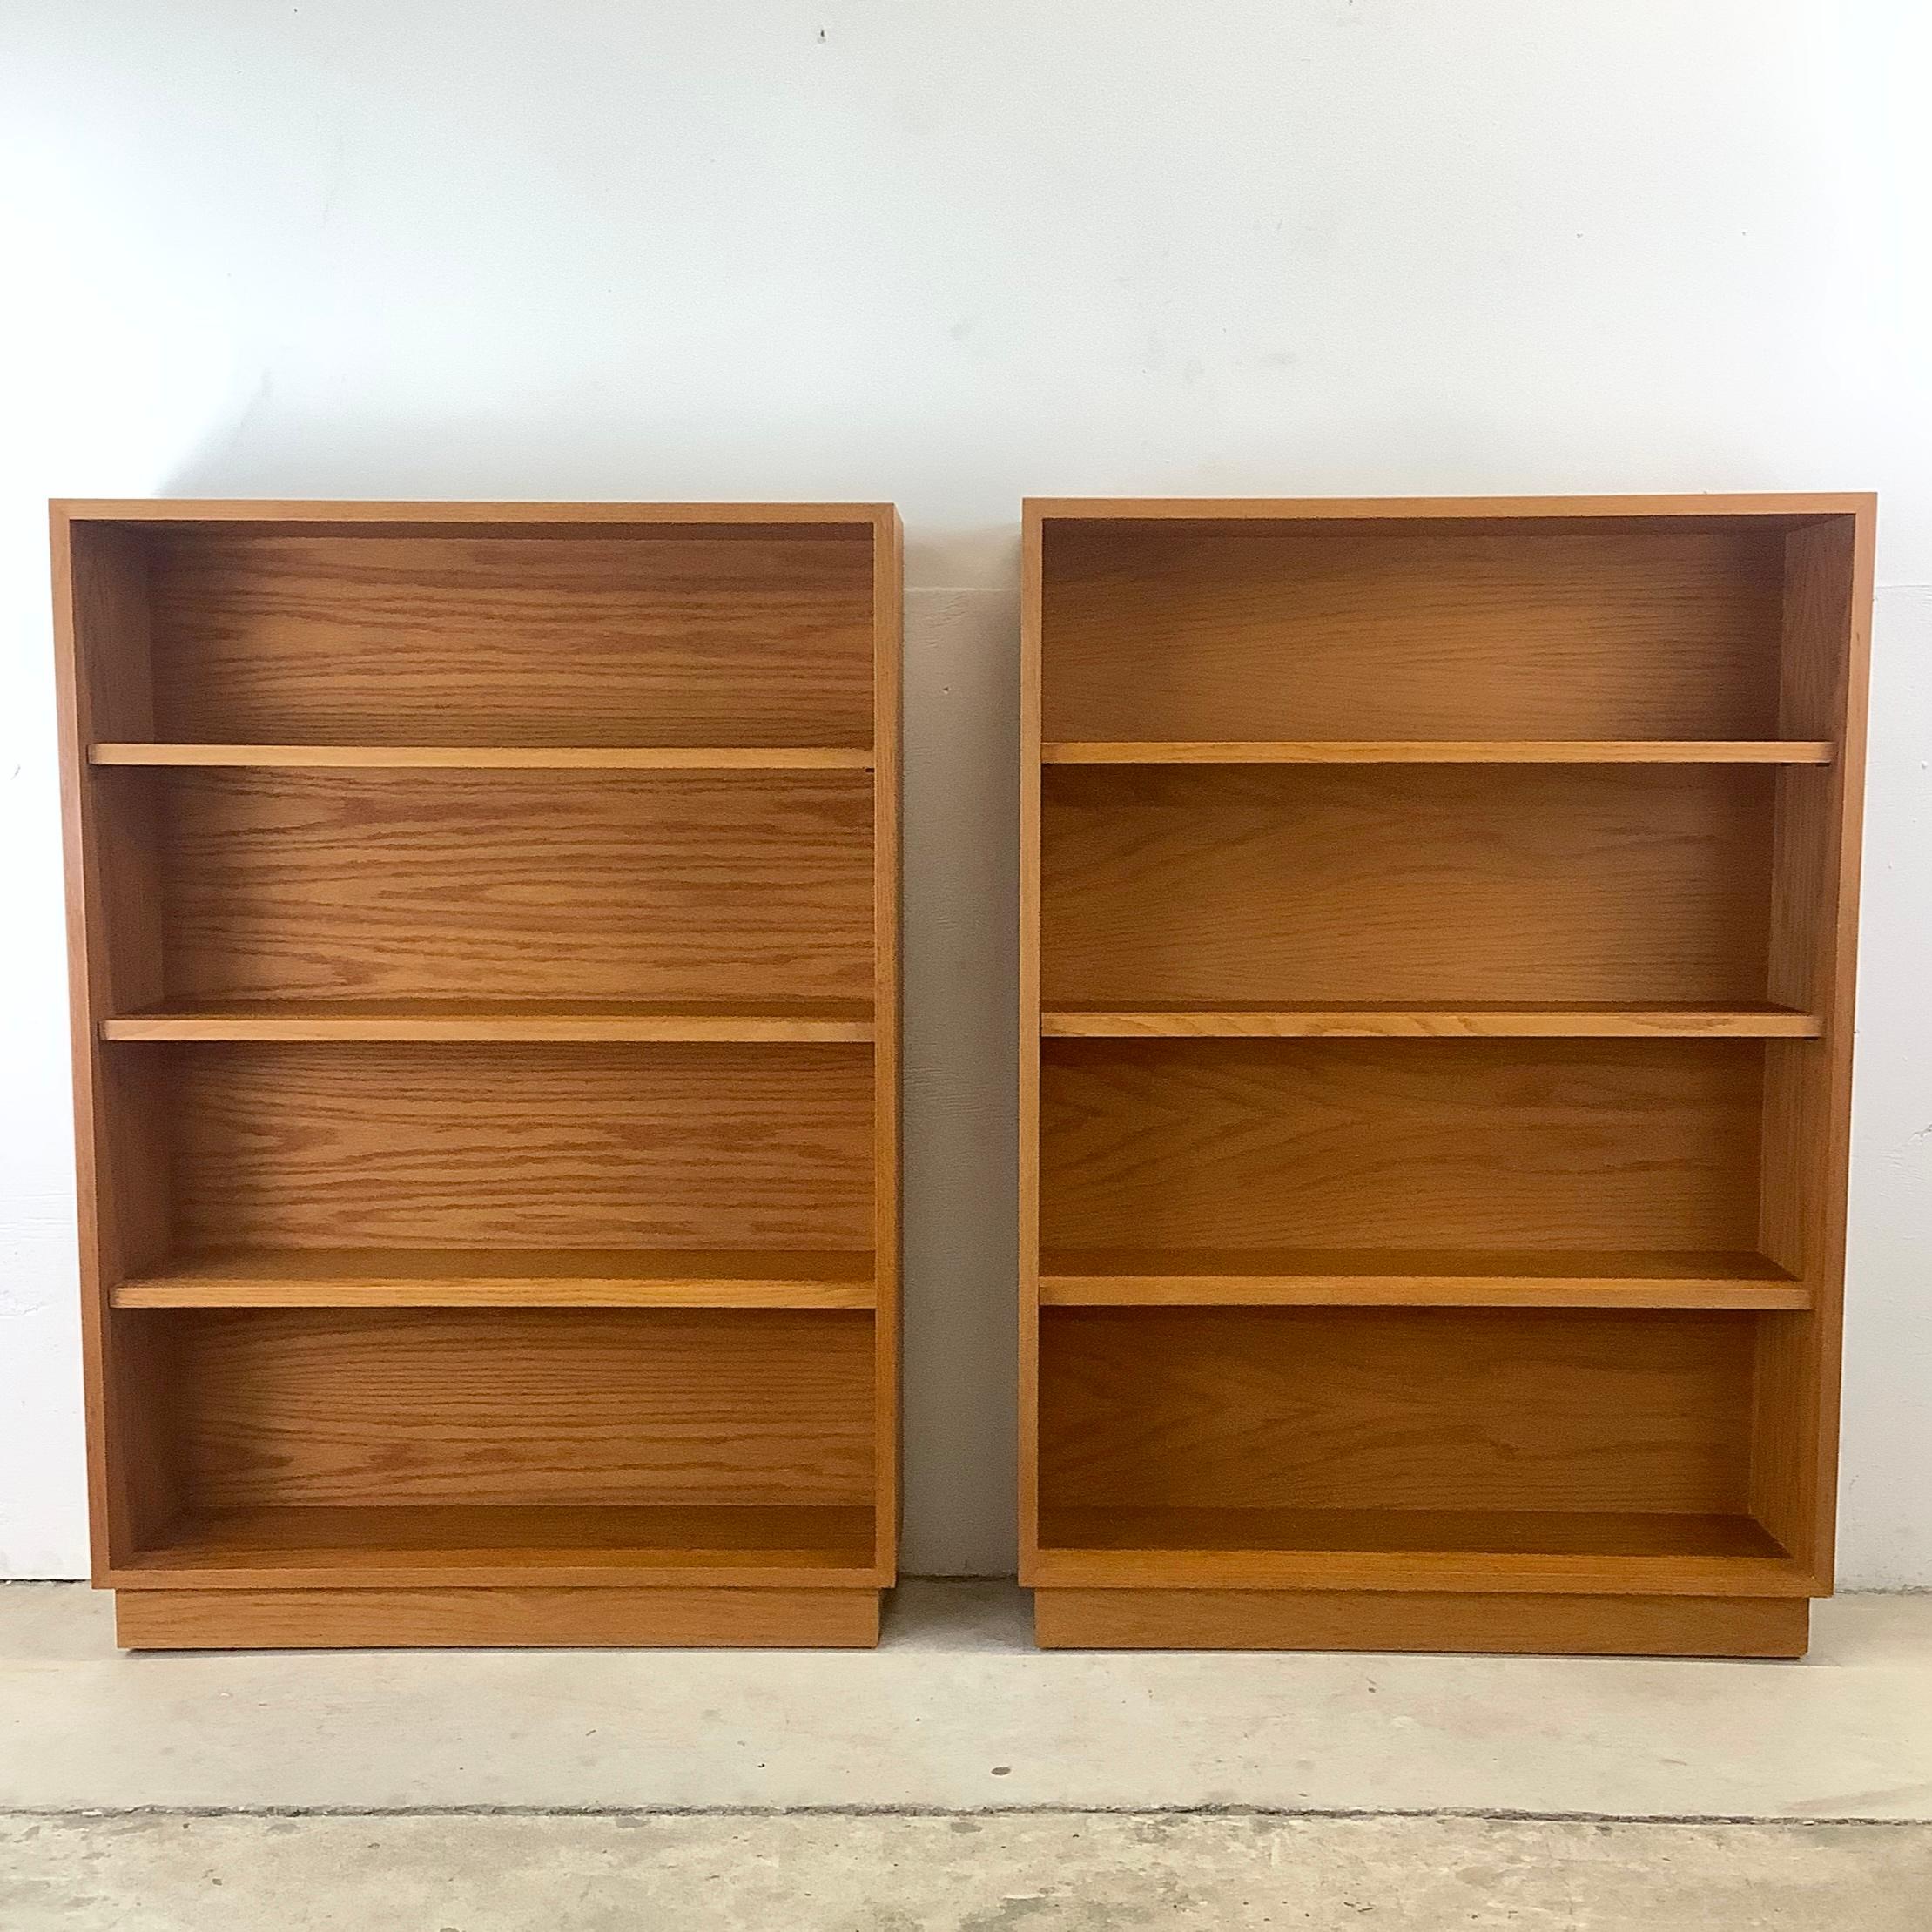 Introducing this pair of simple yet striking four-shelf oak bookcases, crafted to embody the classic appeal and timeless design of mid-century danish furniture. These bookcases, in a rich vintage wood finish, offer both beauty and practicality,